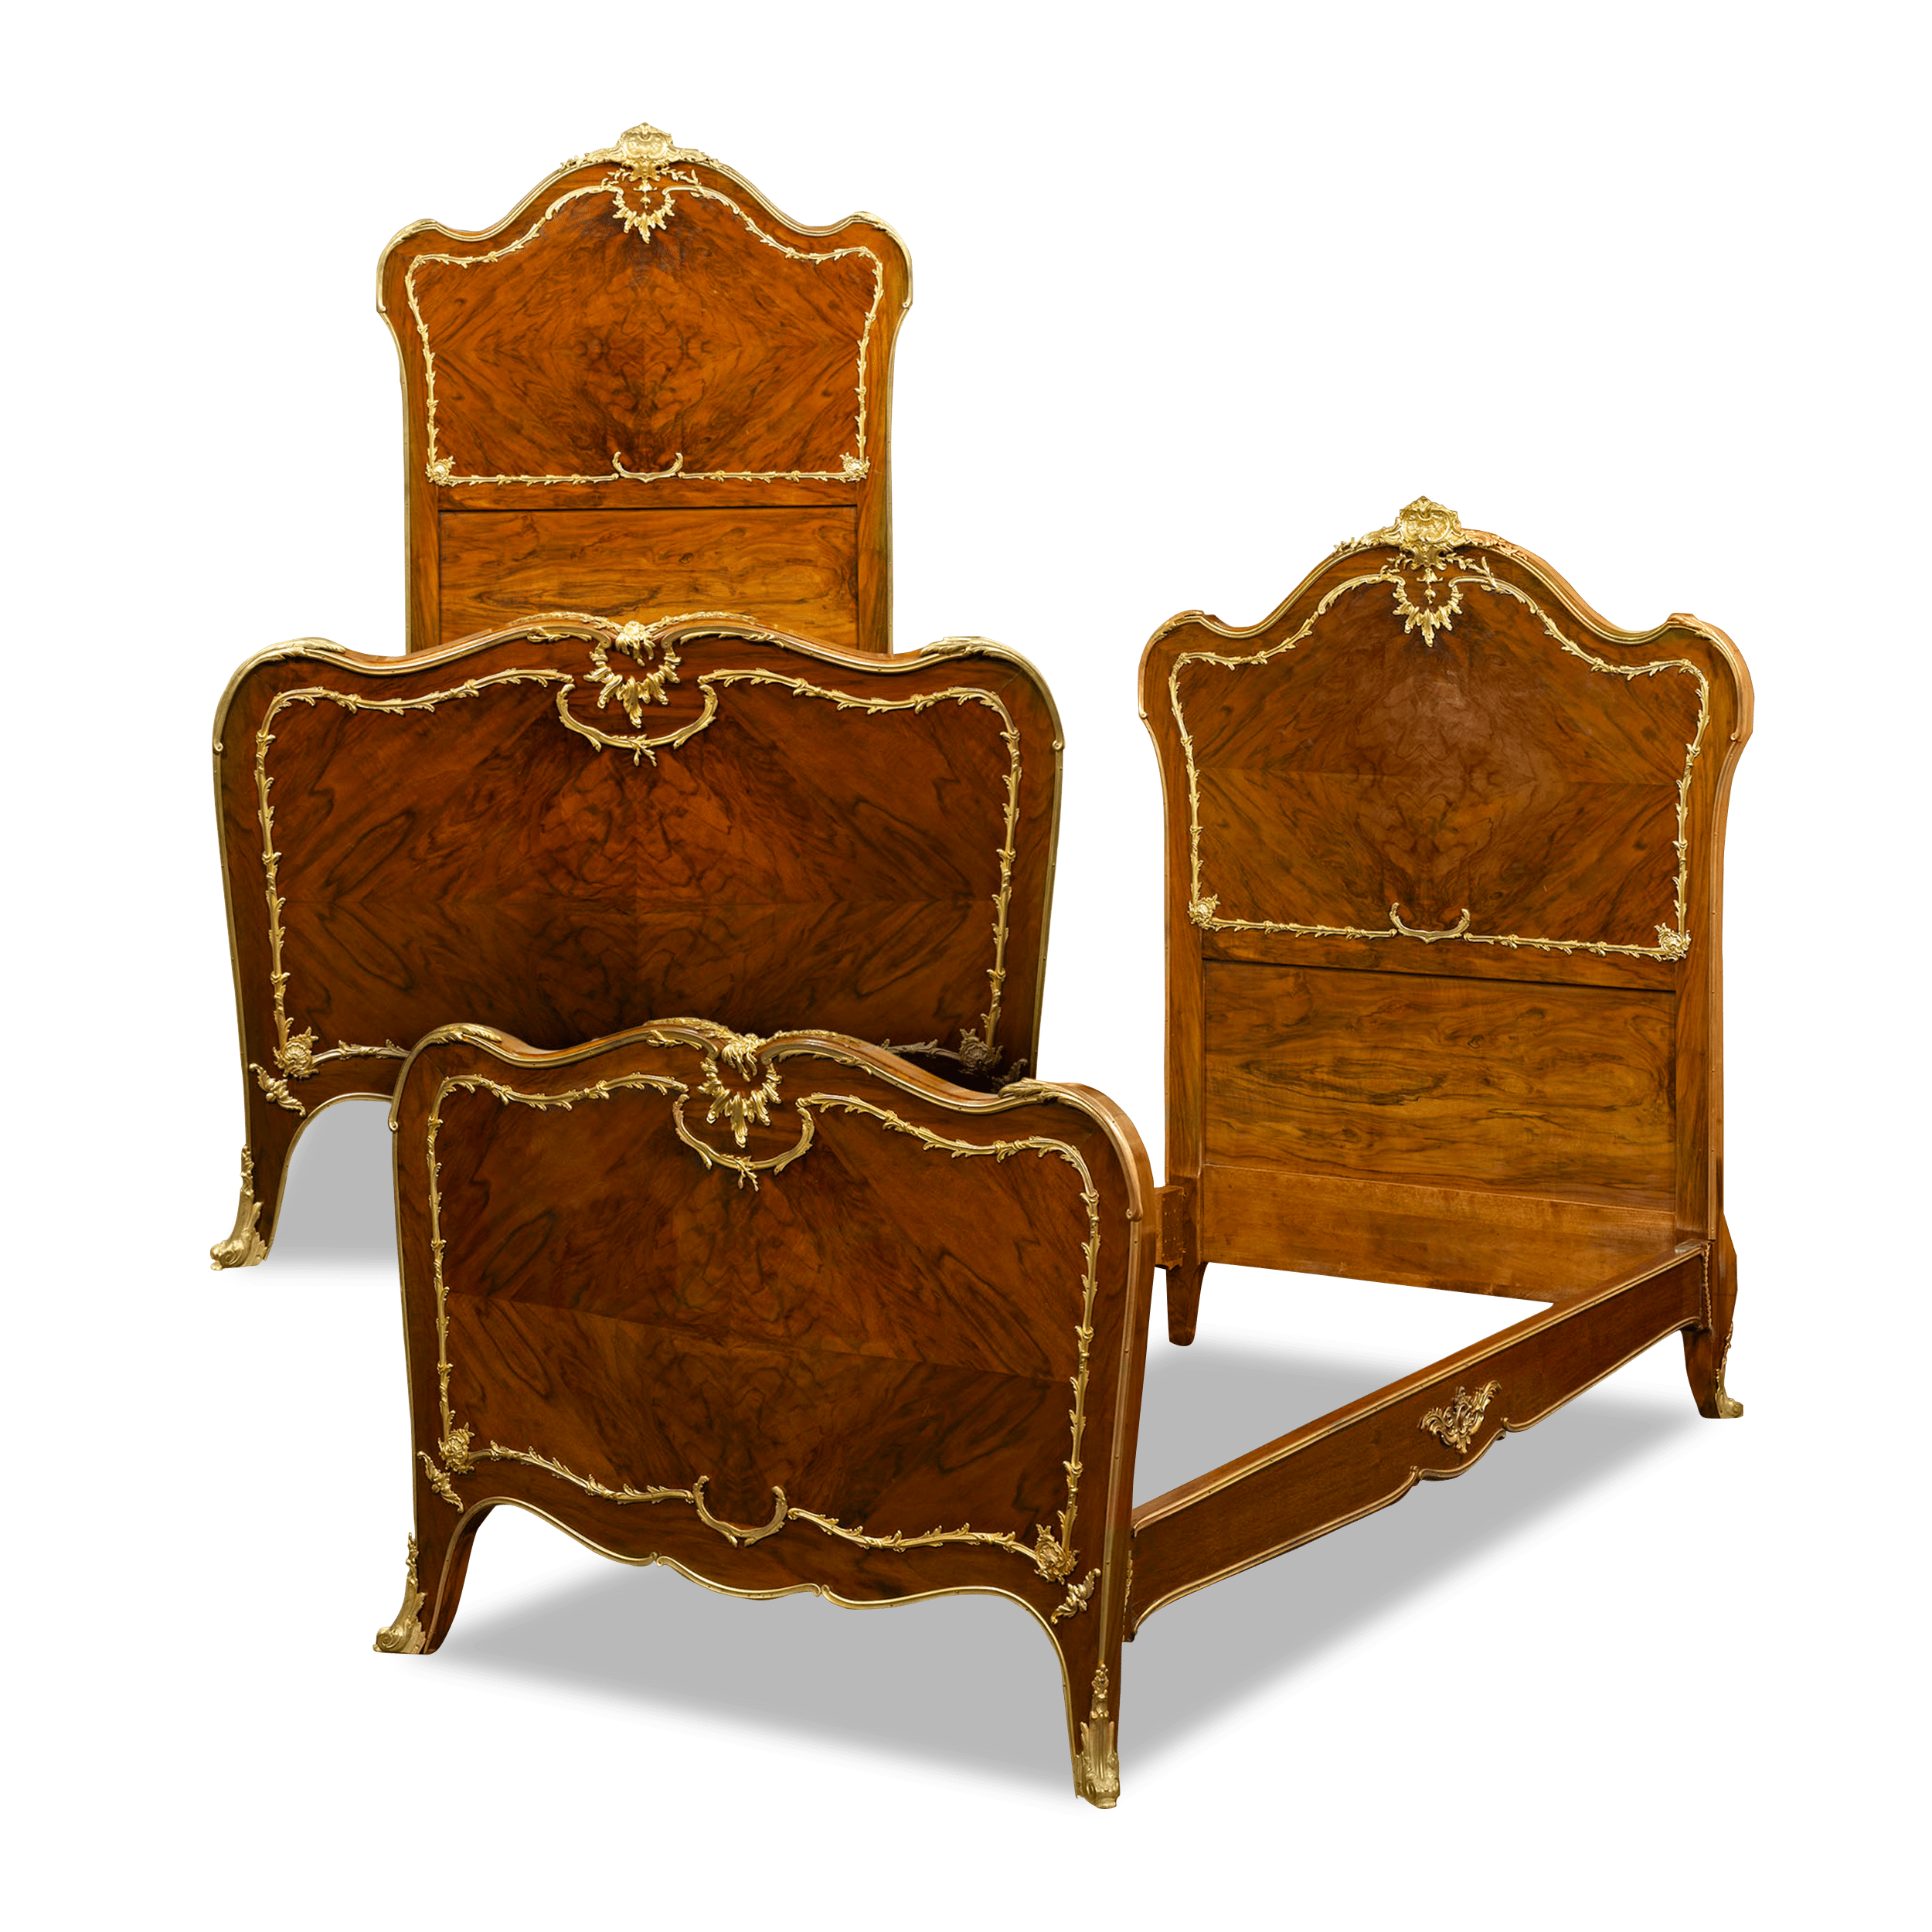 This rare pair of twin beds was created by François Linke